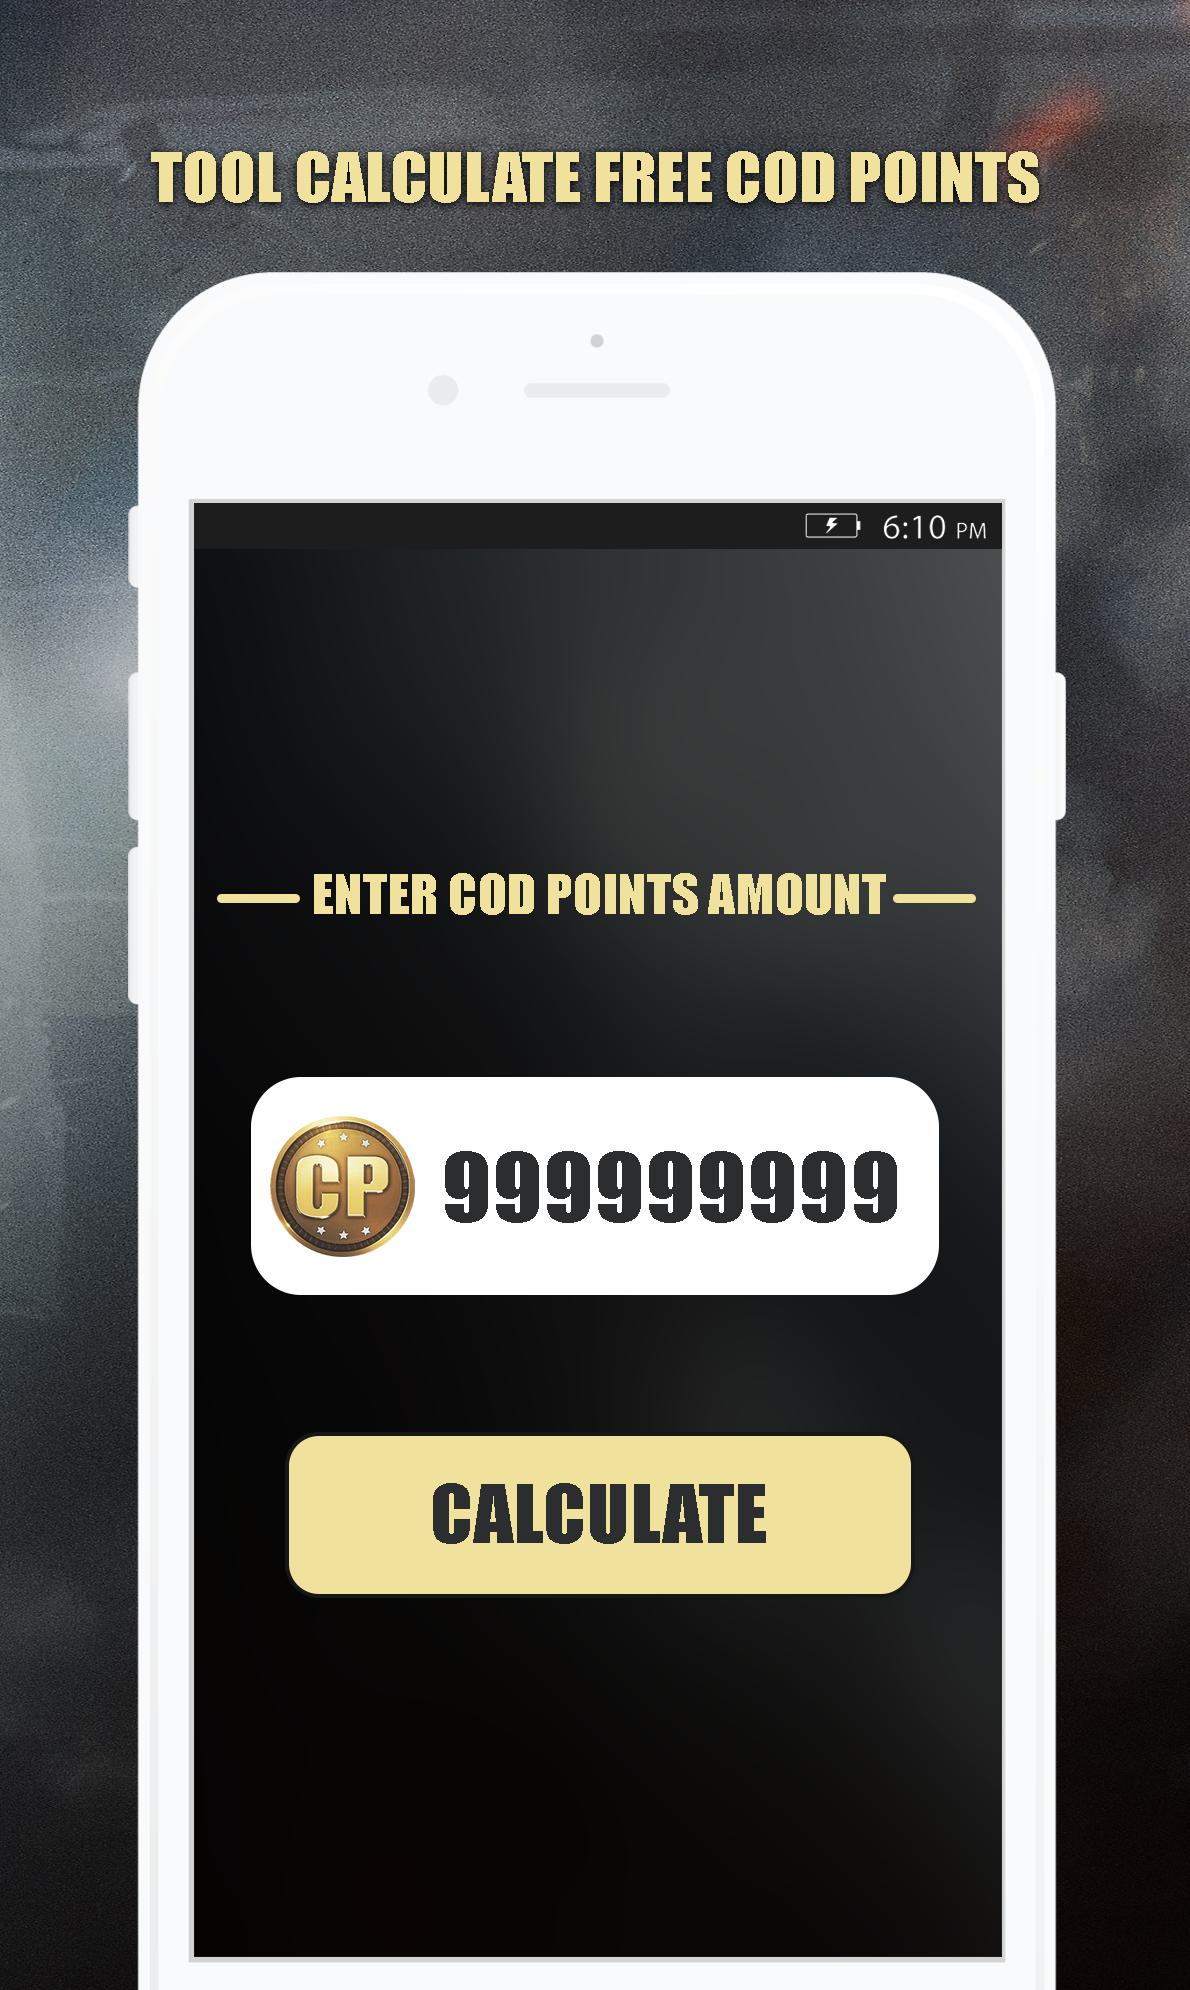 [Unlimited] Free Cod Points & Credits Cod Mobile Apk And Obb File